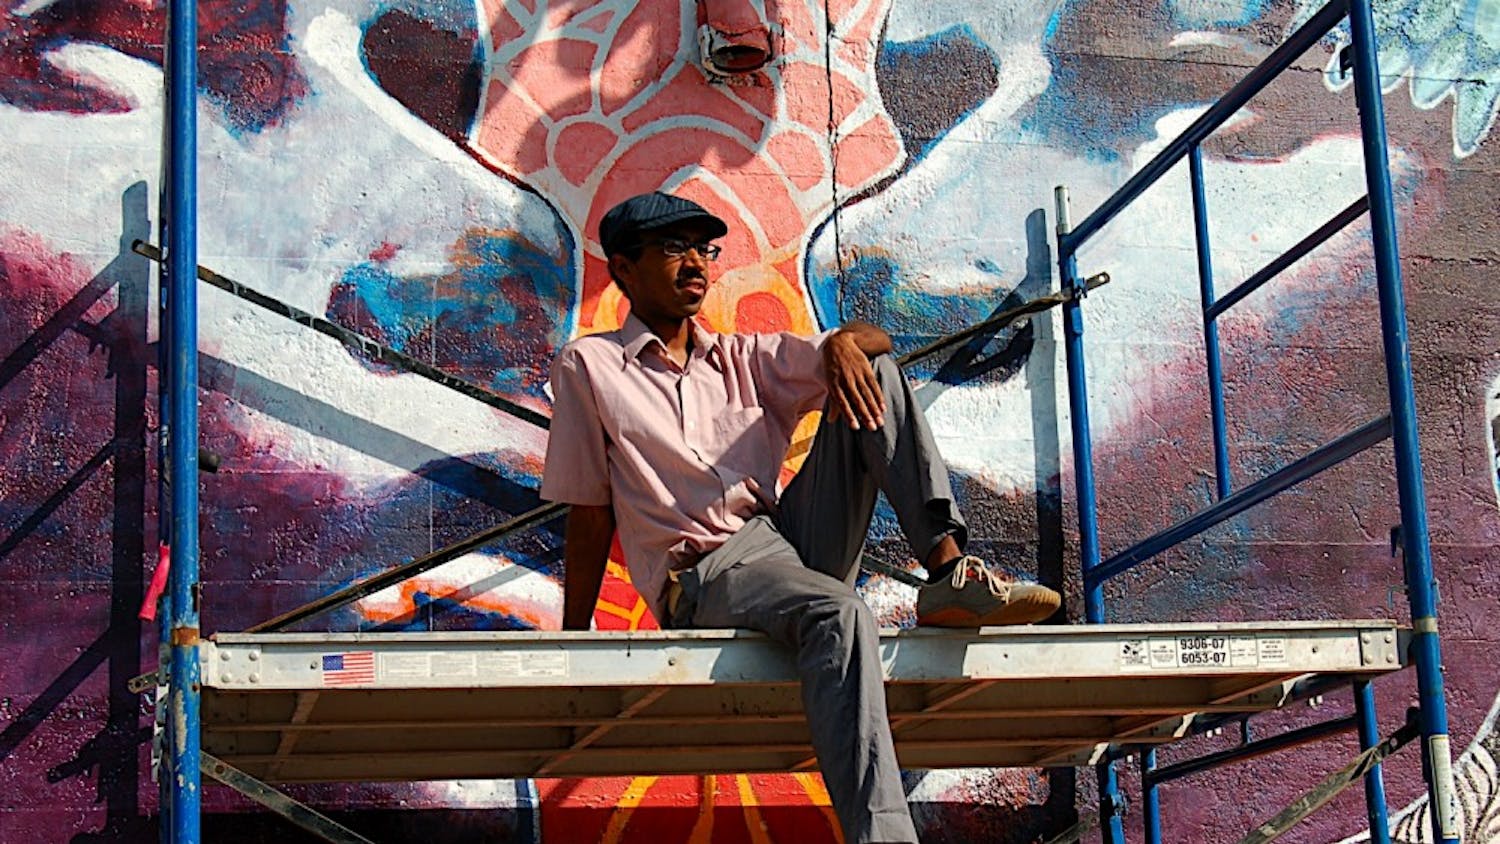 HIGH TIMES -- Joshua Mays, who hails from Philadelphia, brought his spray art to D.C. to inspire those who pass by his works. Mays' work is in the vein of one of the world's best-known in the genre, Banksy. His mural, along with those of the rest of the participants of Mural Jam, can be seen near the Rhode Island Metrorail stop.